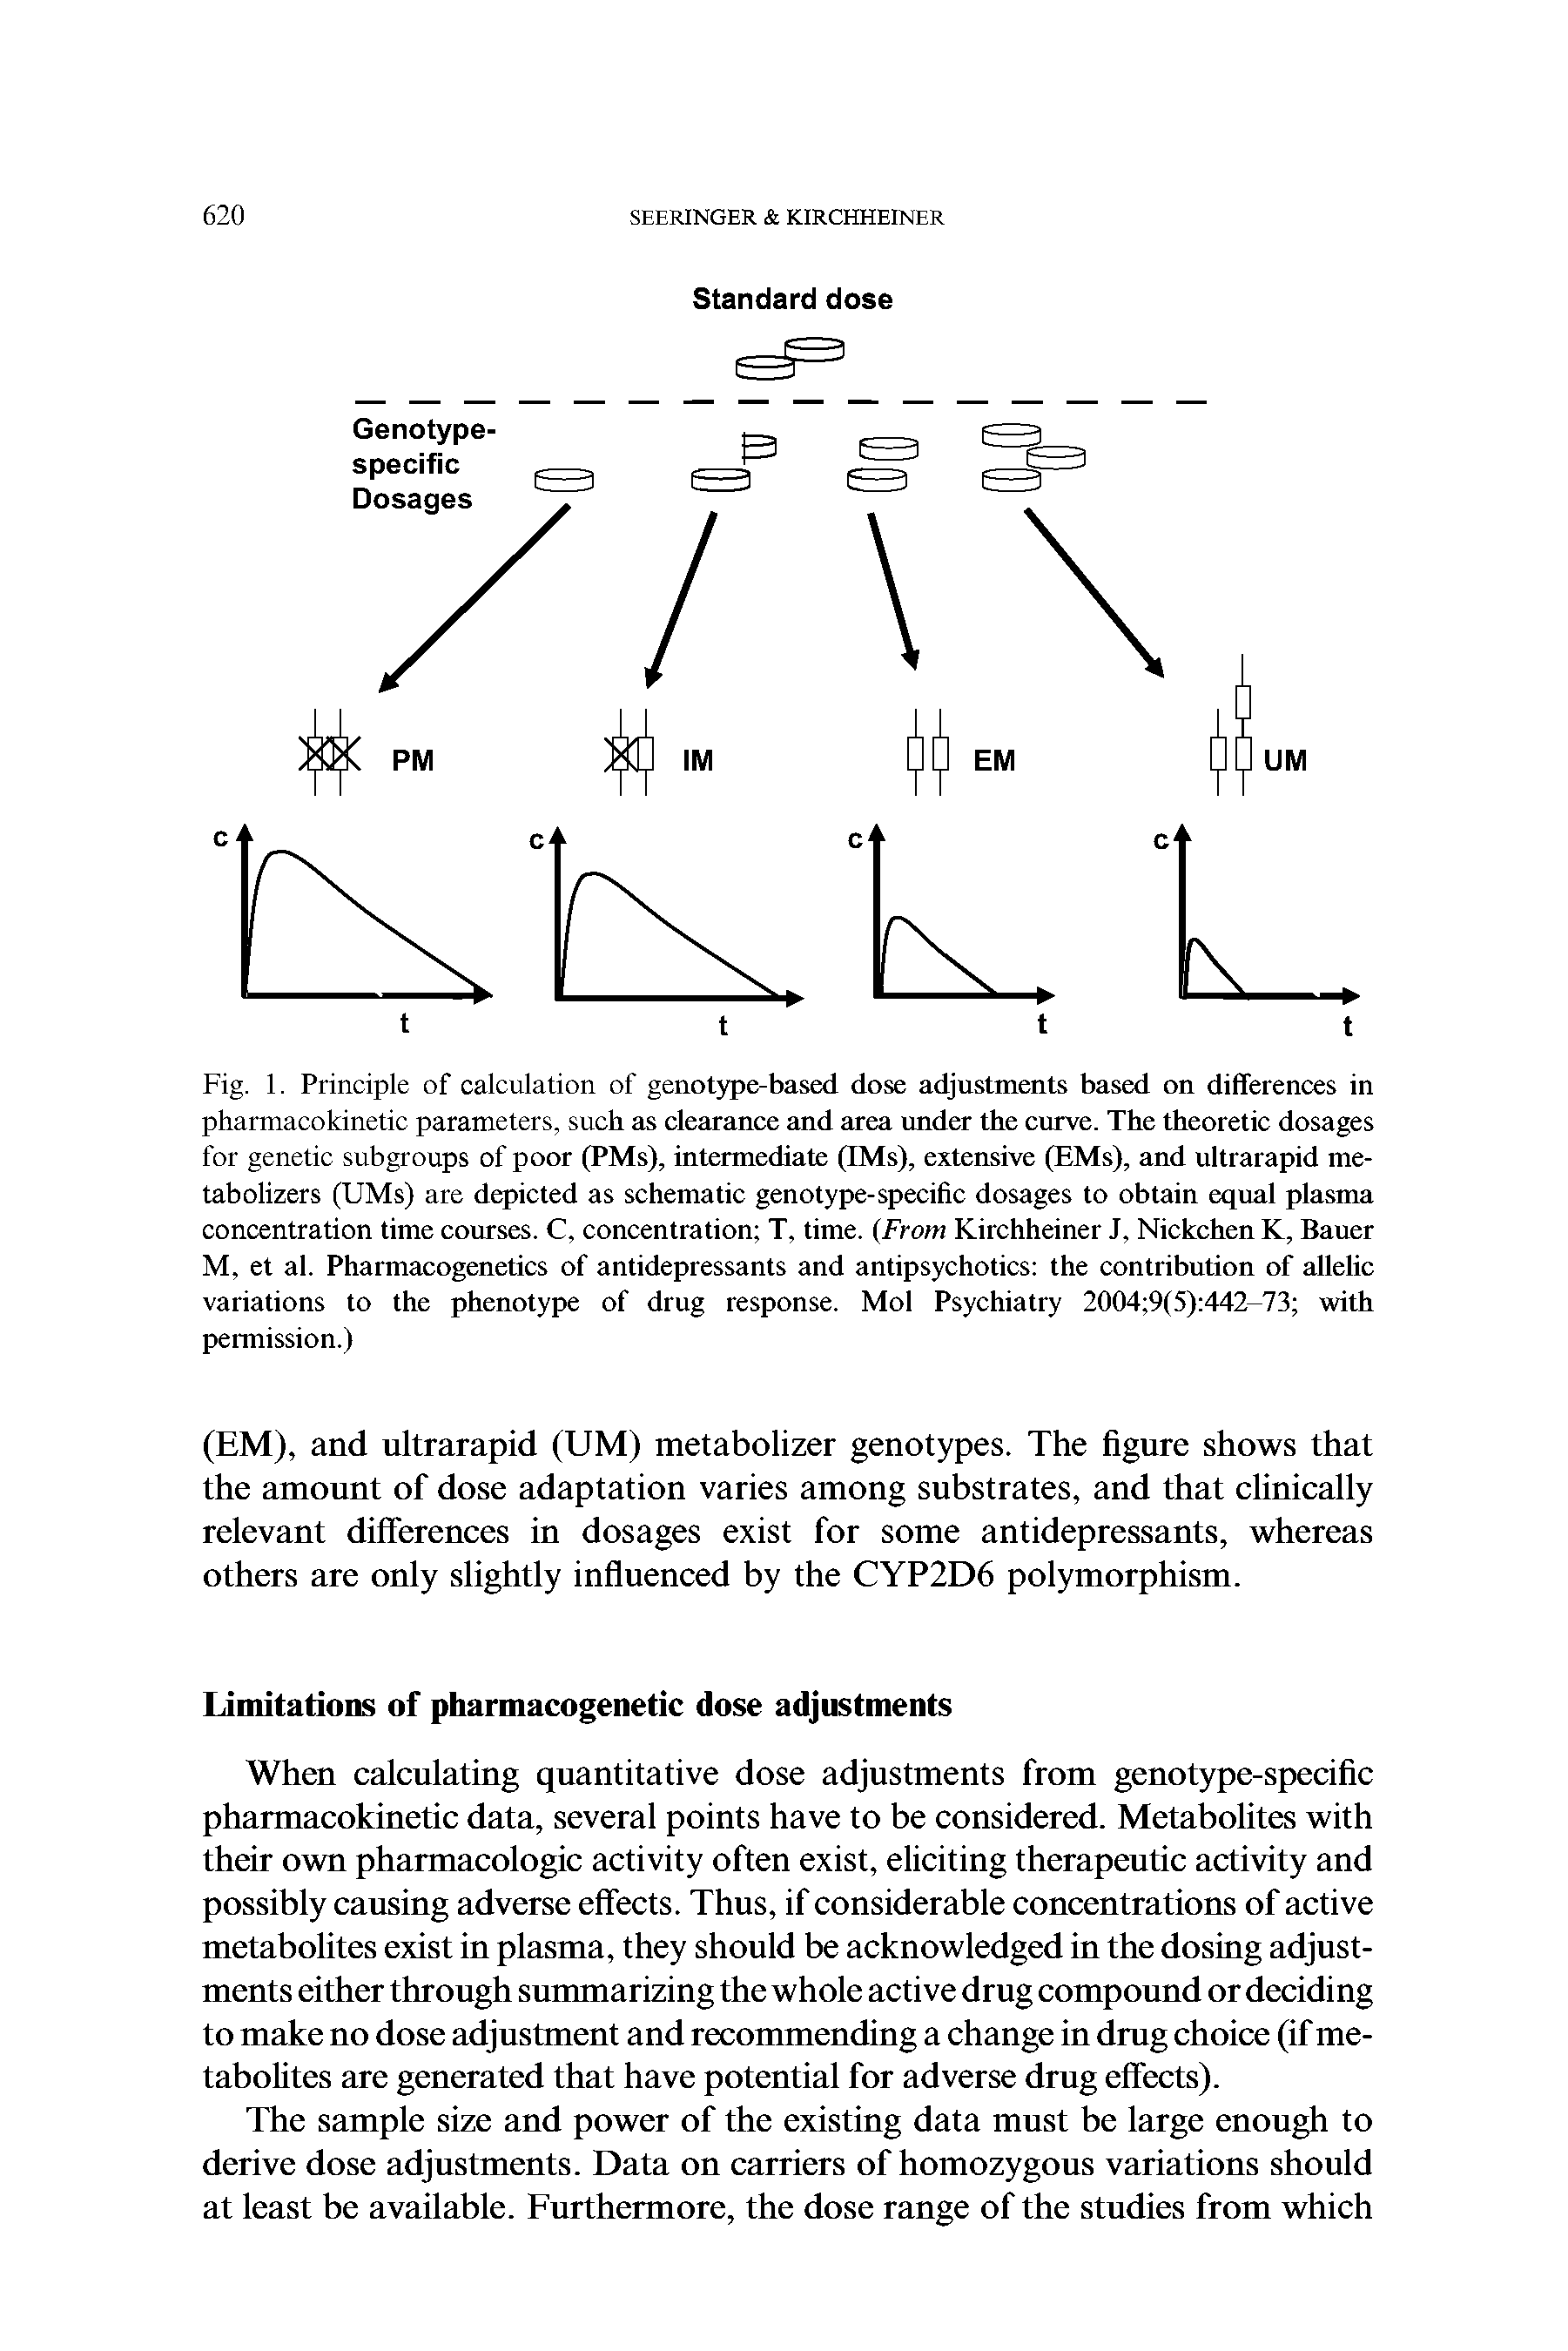 Fig. 1. Principle of calculation of genotype-based dose adjustments based on differences in pharmacokinetic parameters, such as clearance and area under the curve. The theoretic dosages for genetic subgroups of poor (PMs), intermediate (IMs), extensive (RMs), and ultrarapid metabolizers (UMs) are depicted as schematic genotype-specific dosages to obtain equal plasma concentration time courses. C, concentration T, time. (From Kirchheiner J, Nickchcn K, Bauer M, et al. Pharmacogenetics of antidepressants and antipsychotics the contribution of allelic variations to the phenotype of drug response. Mol Psychiatry 2004 9(5) 442-73 with permission.)...